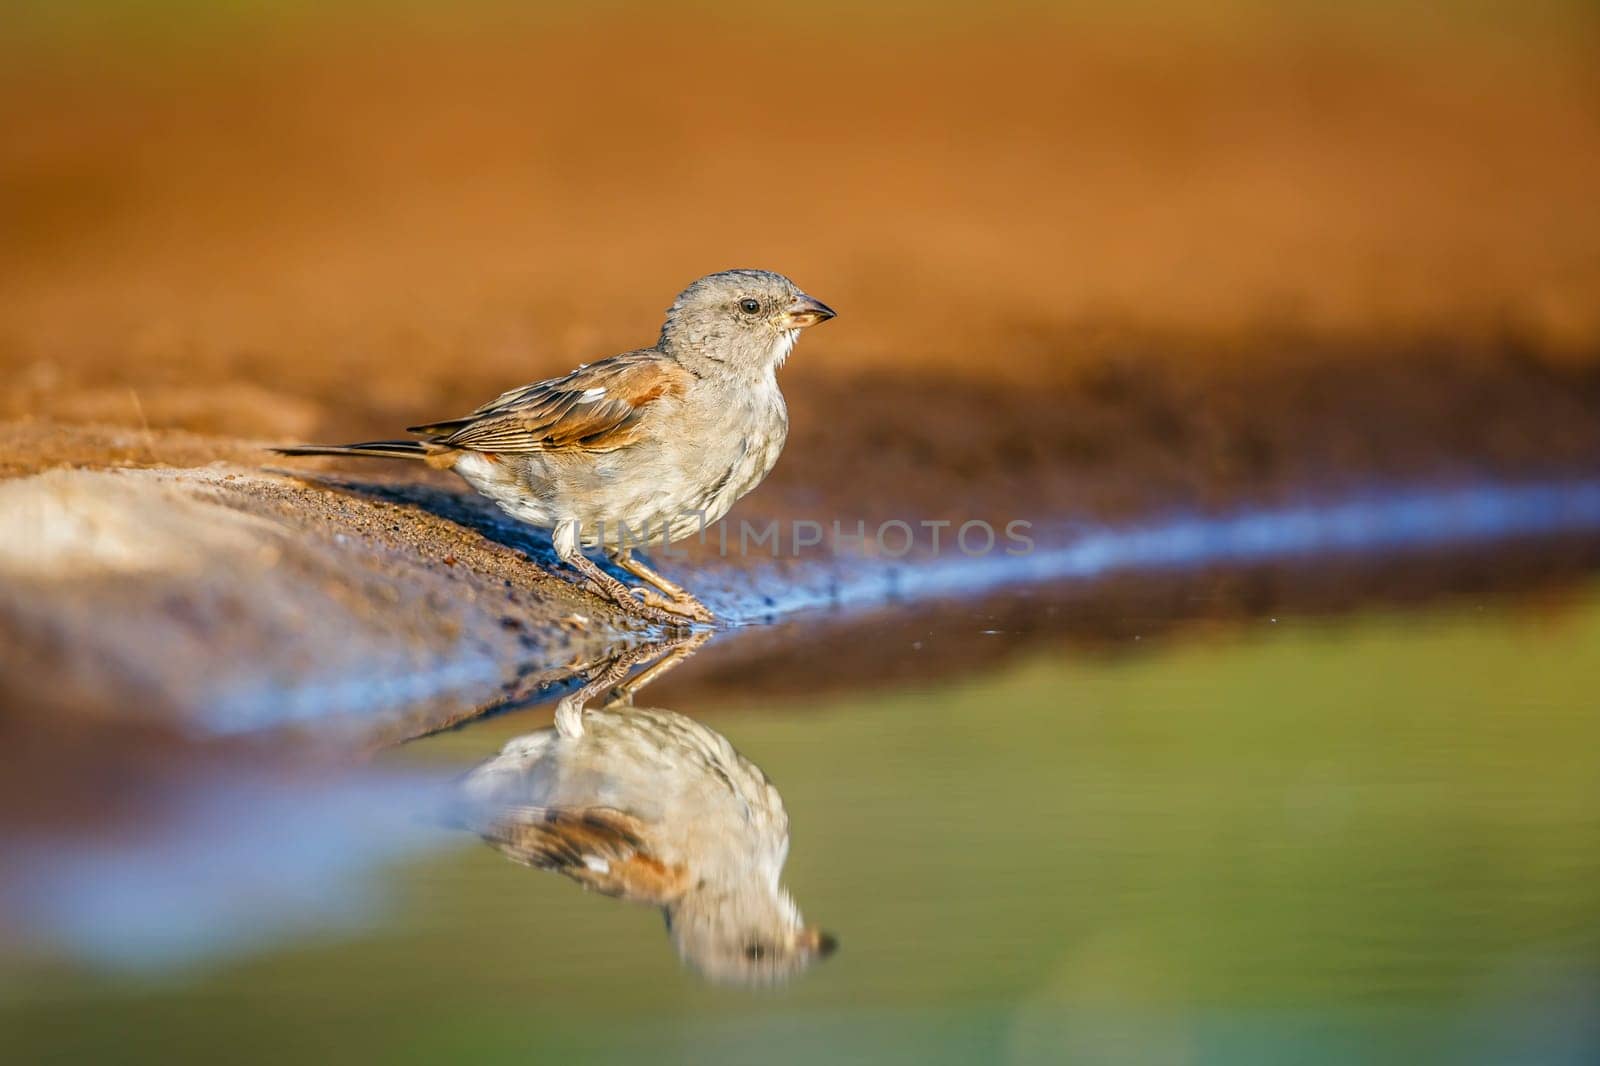 Southern grey headed sparrow in Kruger national park, South Africa by PACOCOMO